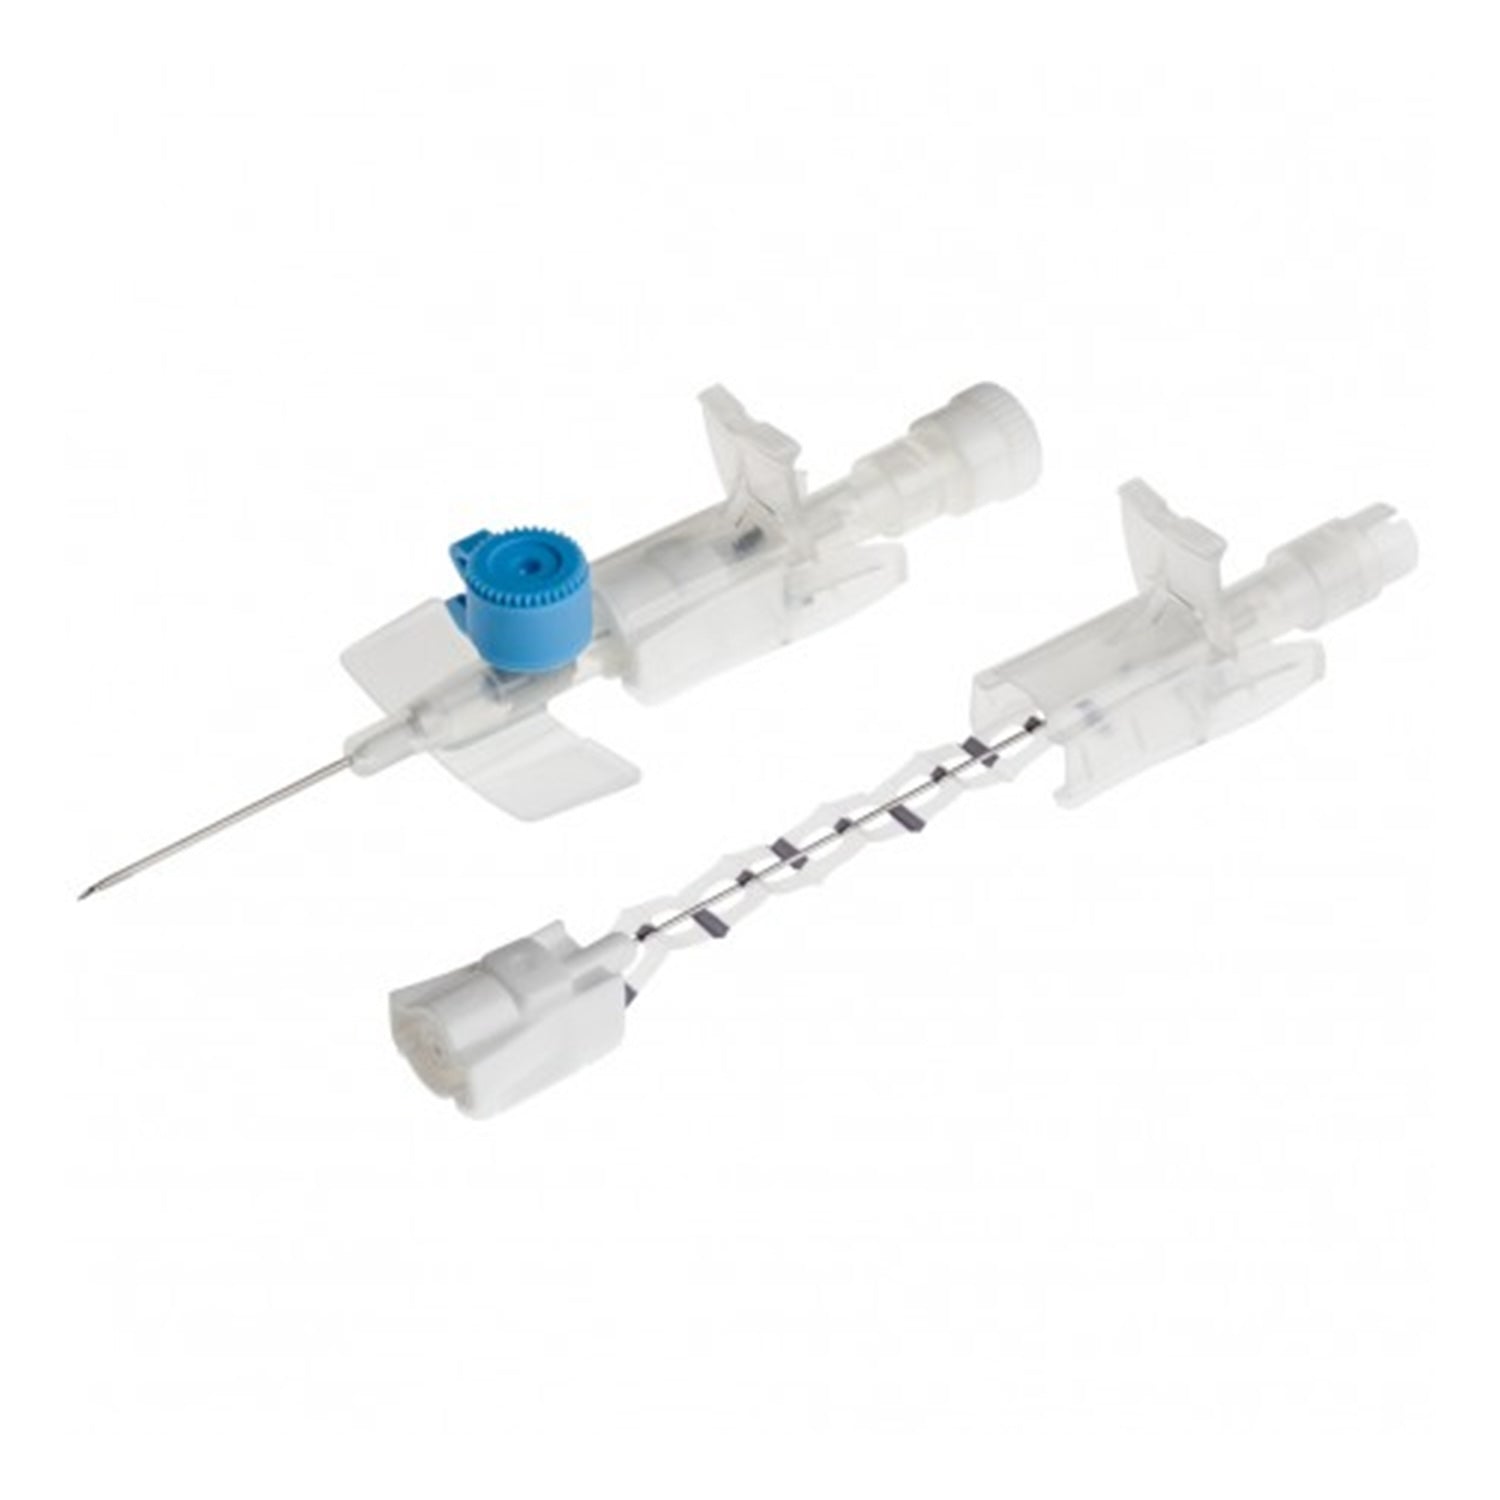 BD Venflon Pro Safety Peripheral IV Cannula with Injection Port | Blue | 22G x 25 x 0.9mm | Pack of 50 (1)